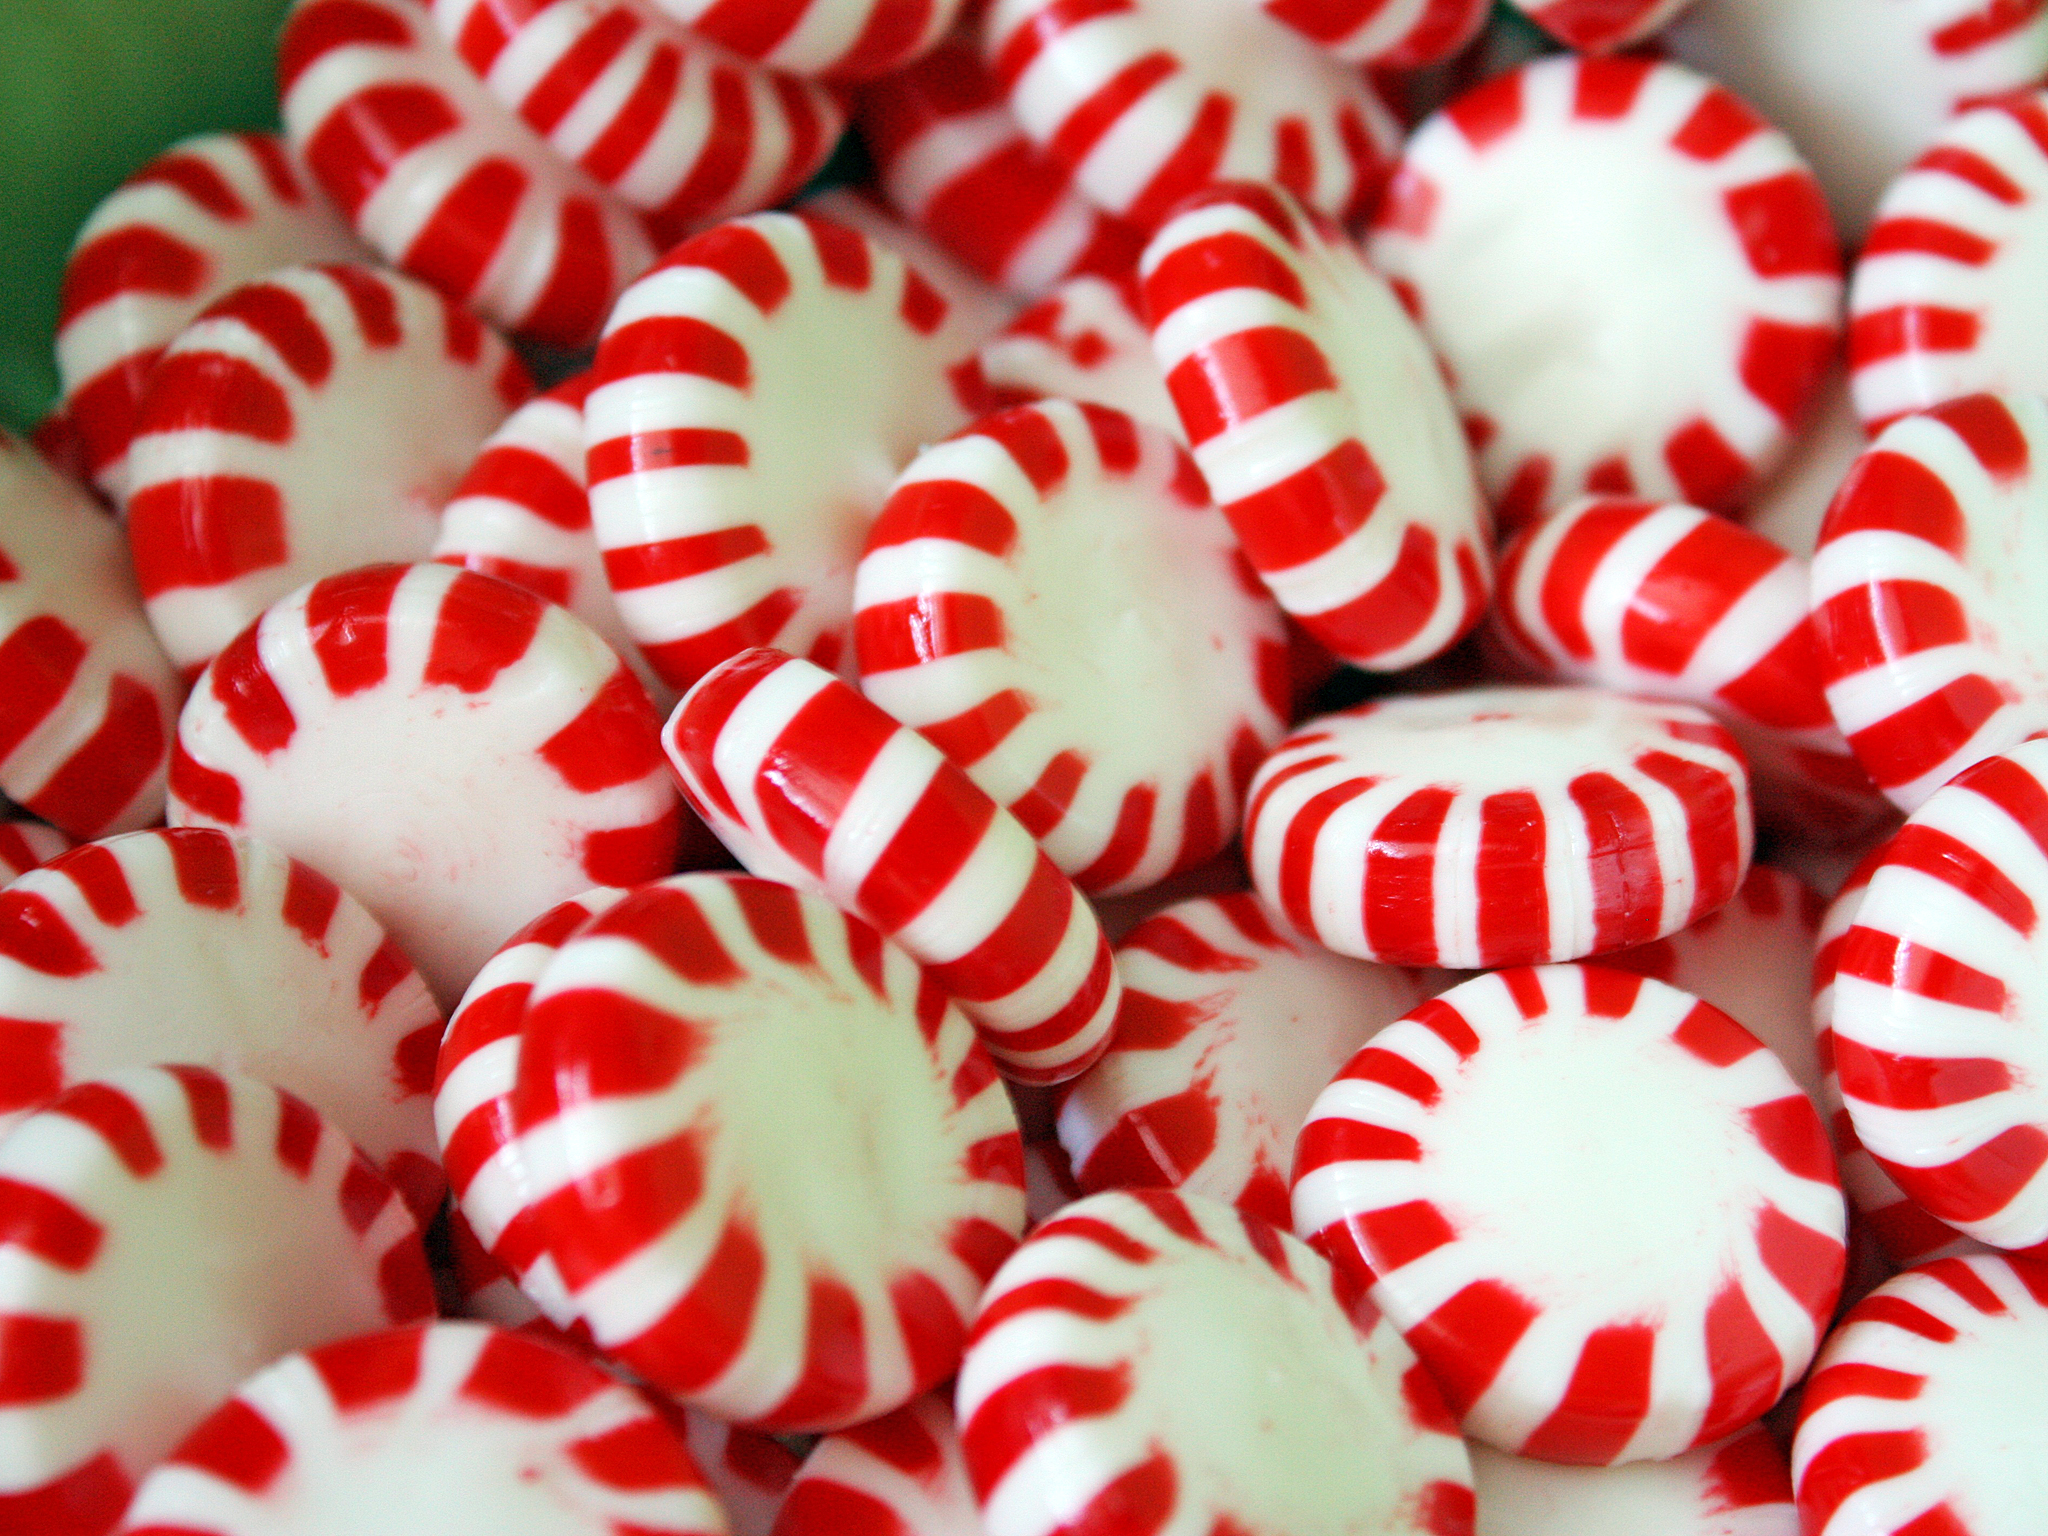 They like sweets. Peppermint Candy. Peppermint конфеты. Леденец красно белый. Красно белые конфеты круглые.